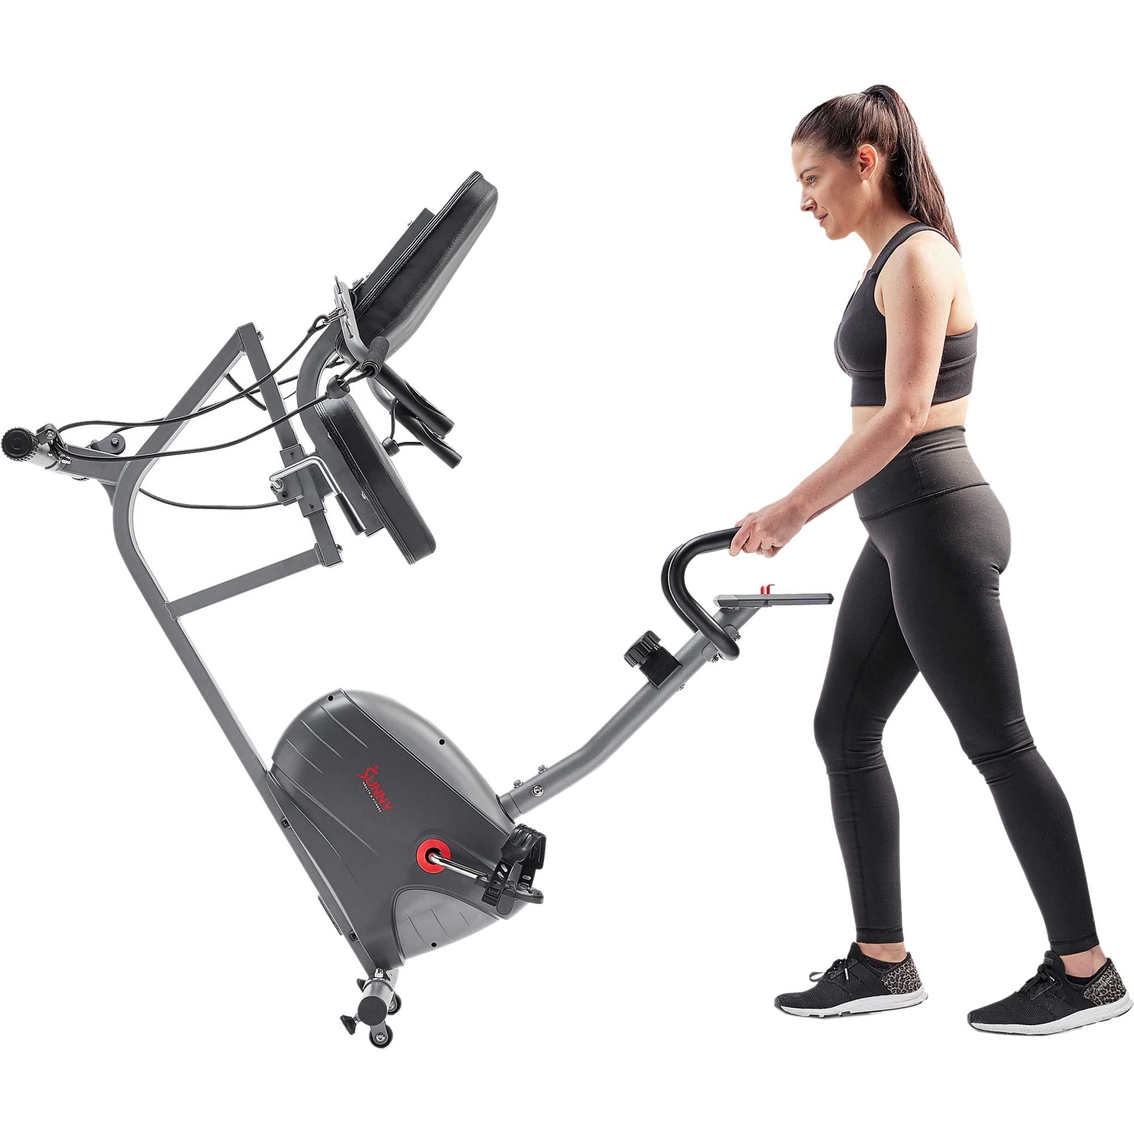 Sunny Health and Fitness Performance Interactive Series Recumbent Exercise Bike - Image 9 of 10